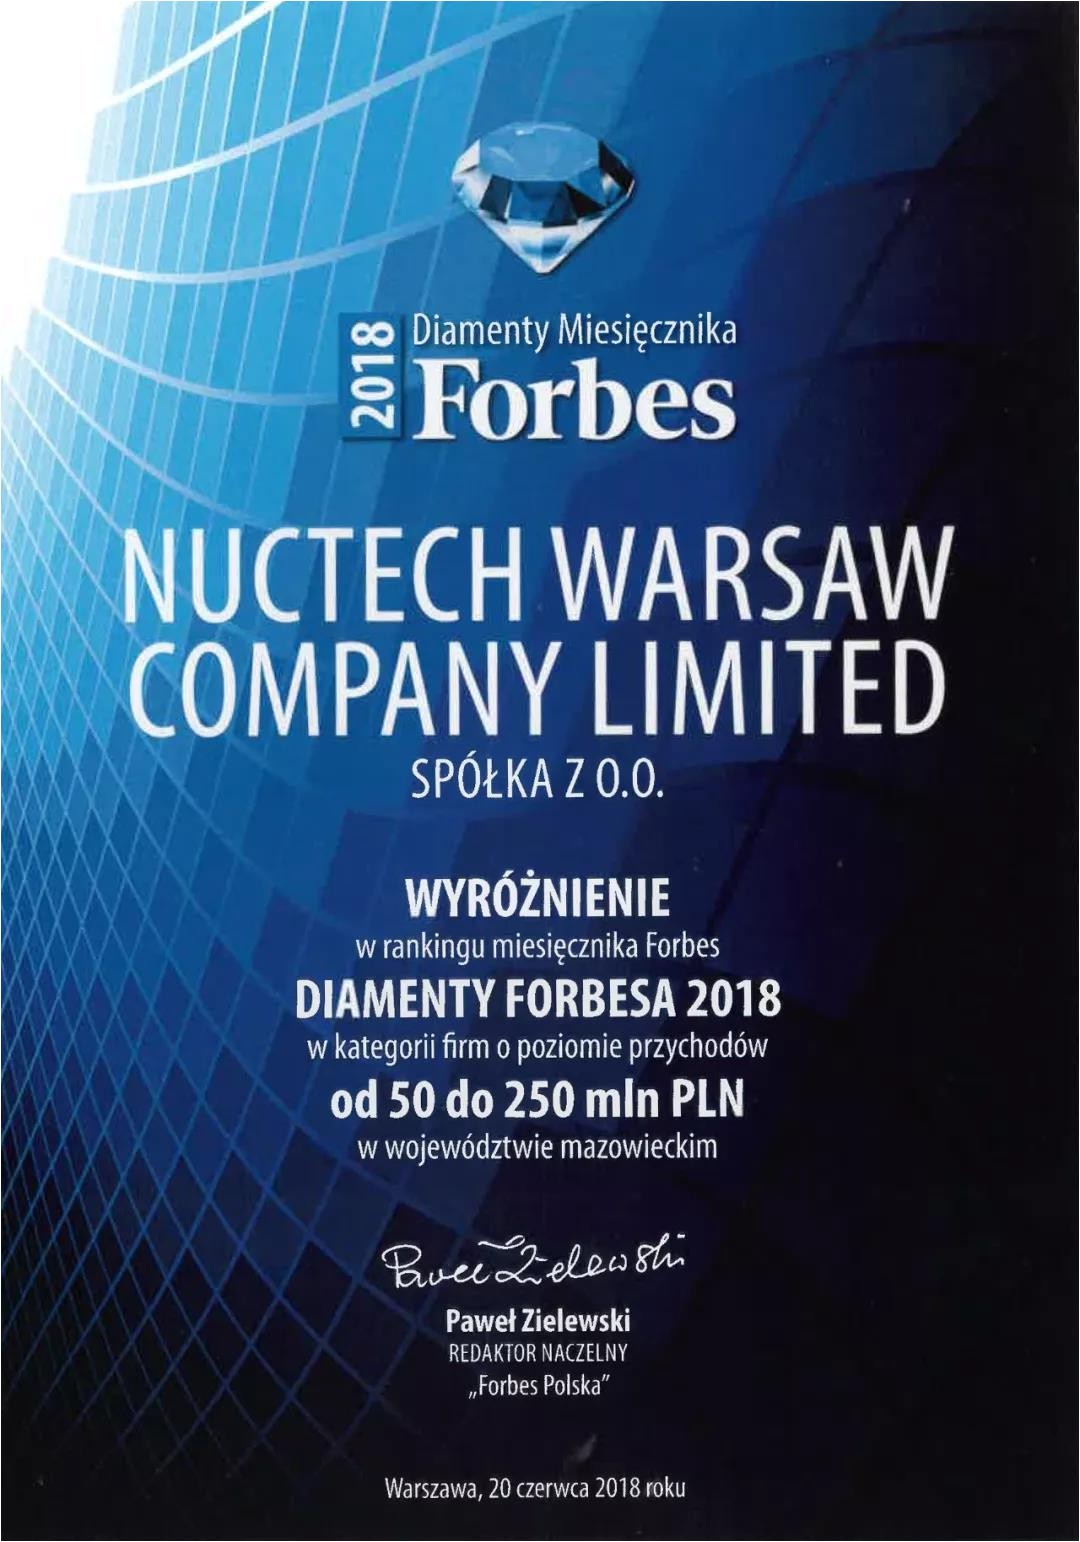 nuctech warsaw has received the forbes diamonds 2018 award